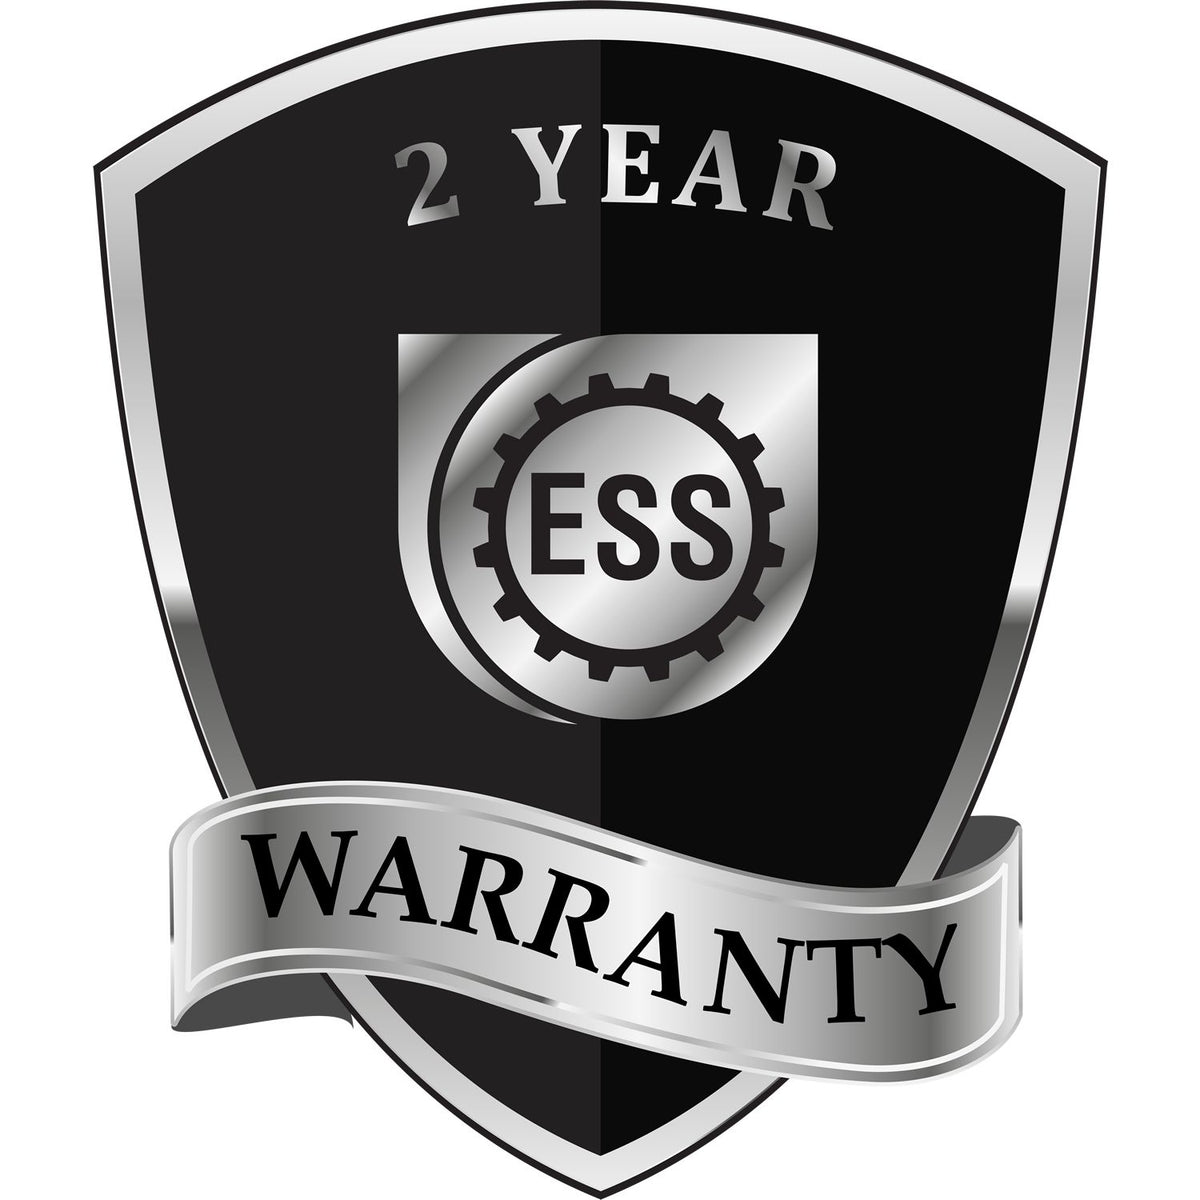 A badge or emblem showing a warranty icon for the Heavy Duty Cast Iron Kansas Engineer Seal Embosser